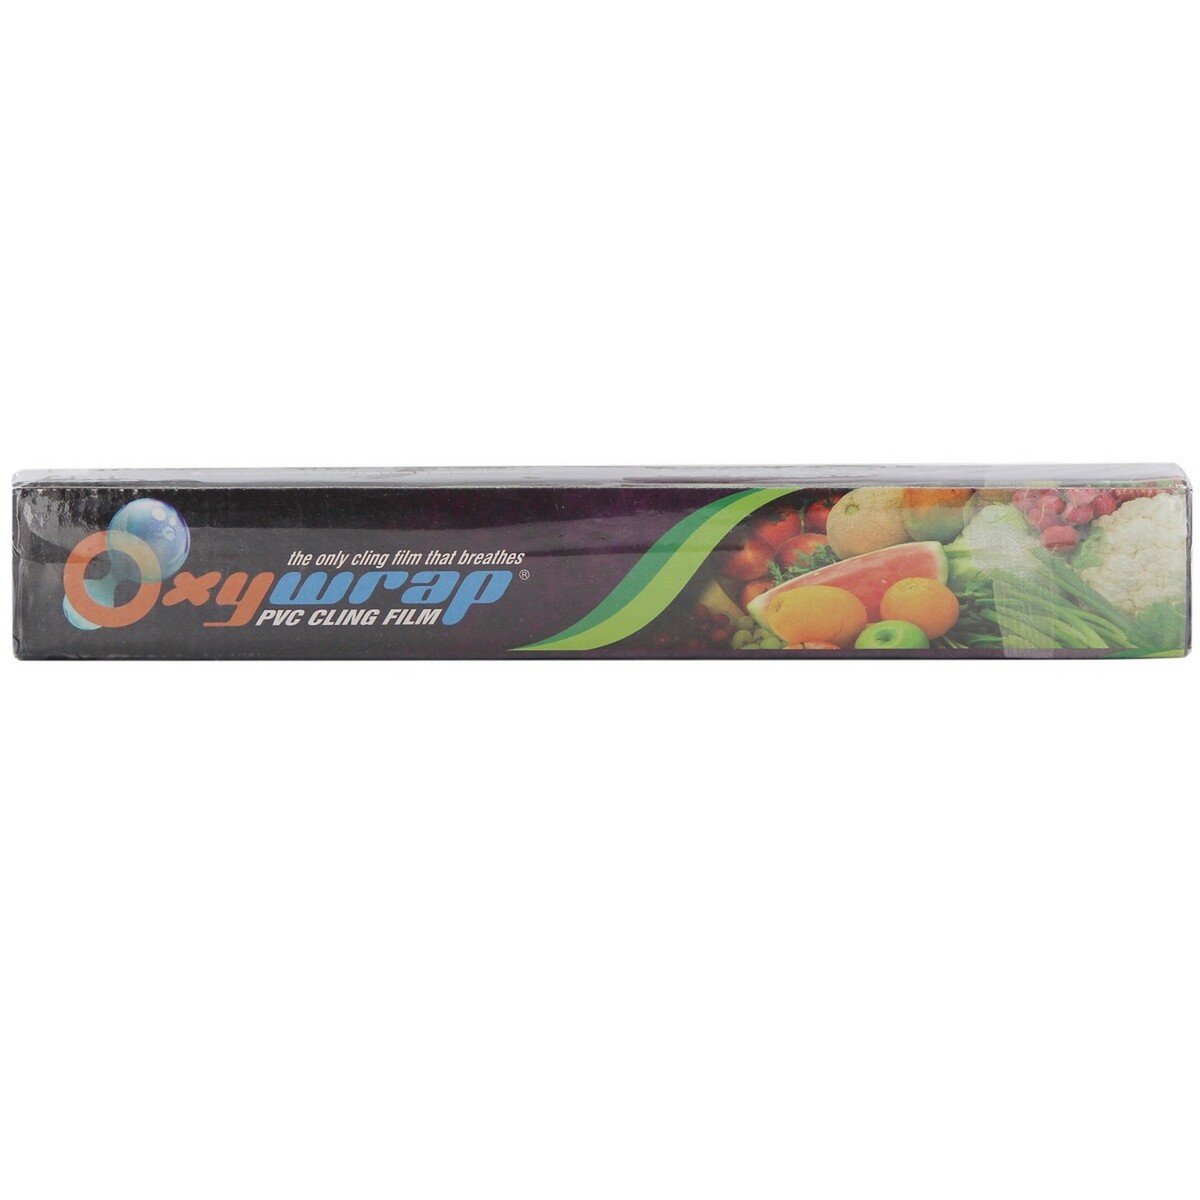 Pearl Cling Film Oxy Wrap 20 Meter